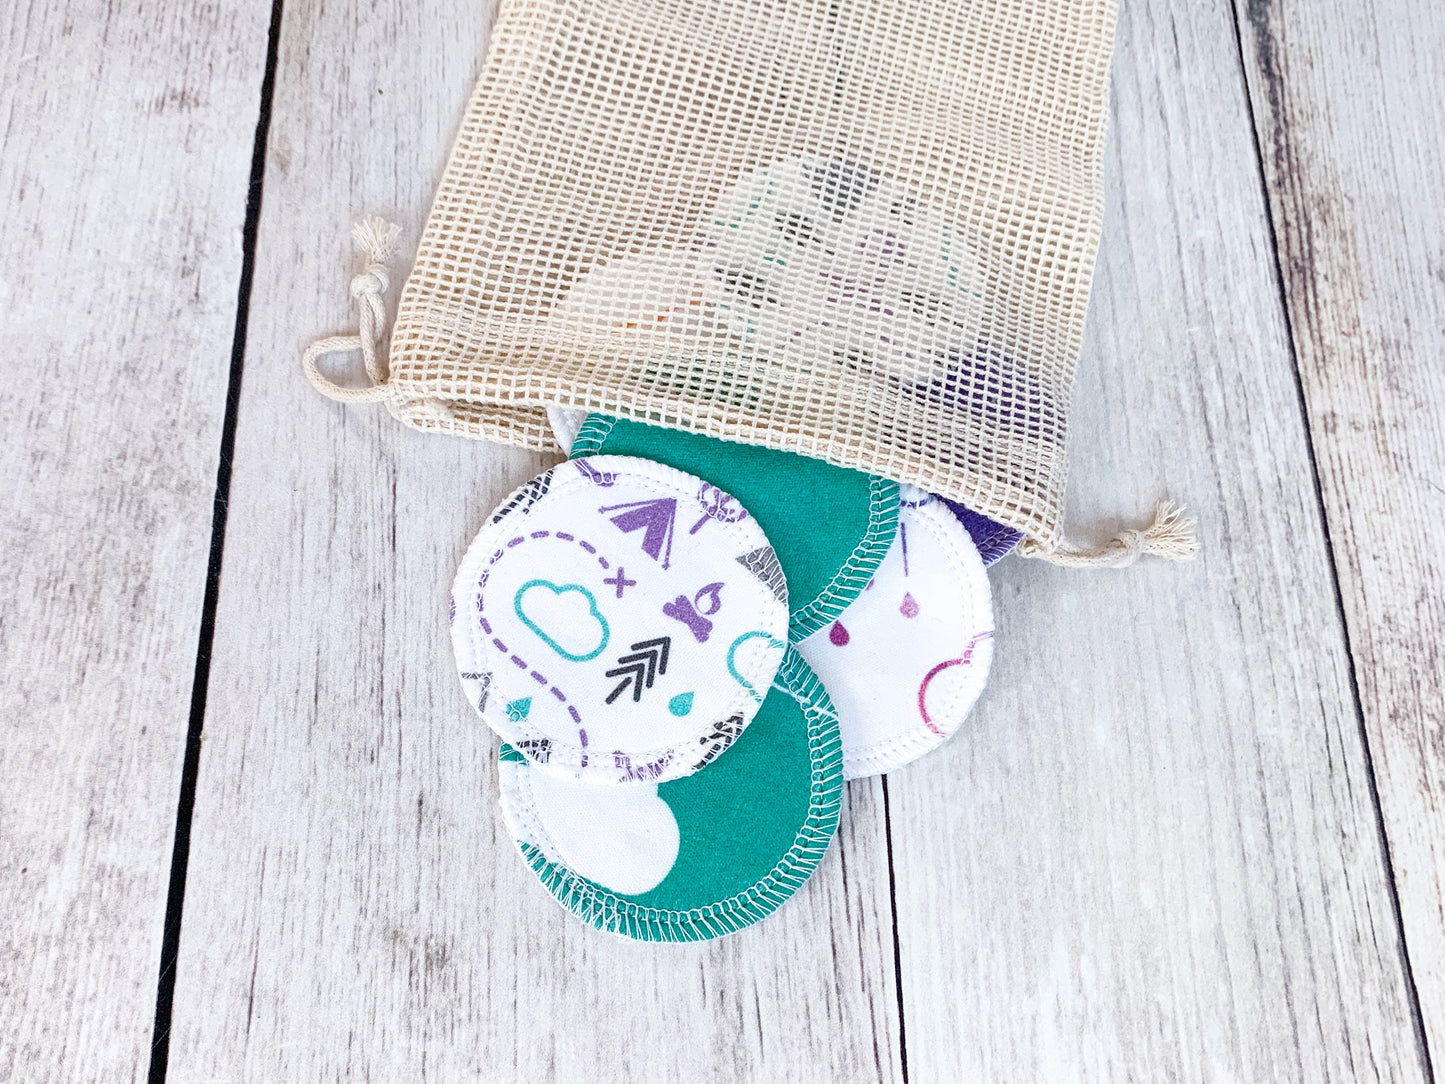 Organic Cotton Face Rounds - Set #5 - PNW + Clouds Mix - Purple / Mint / Teal (Small)